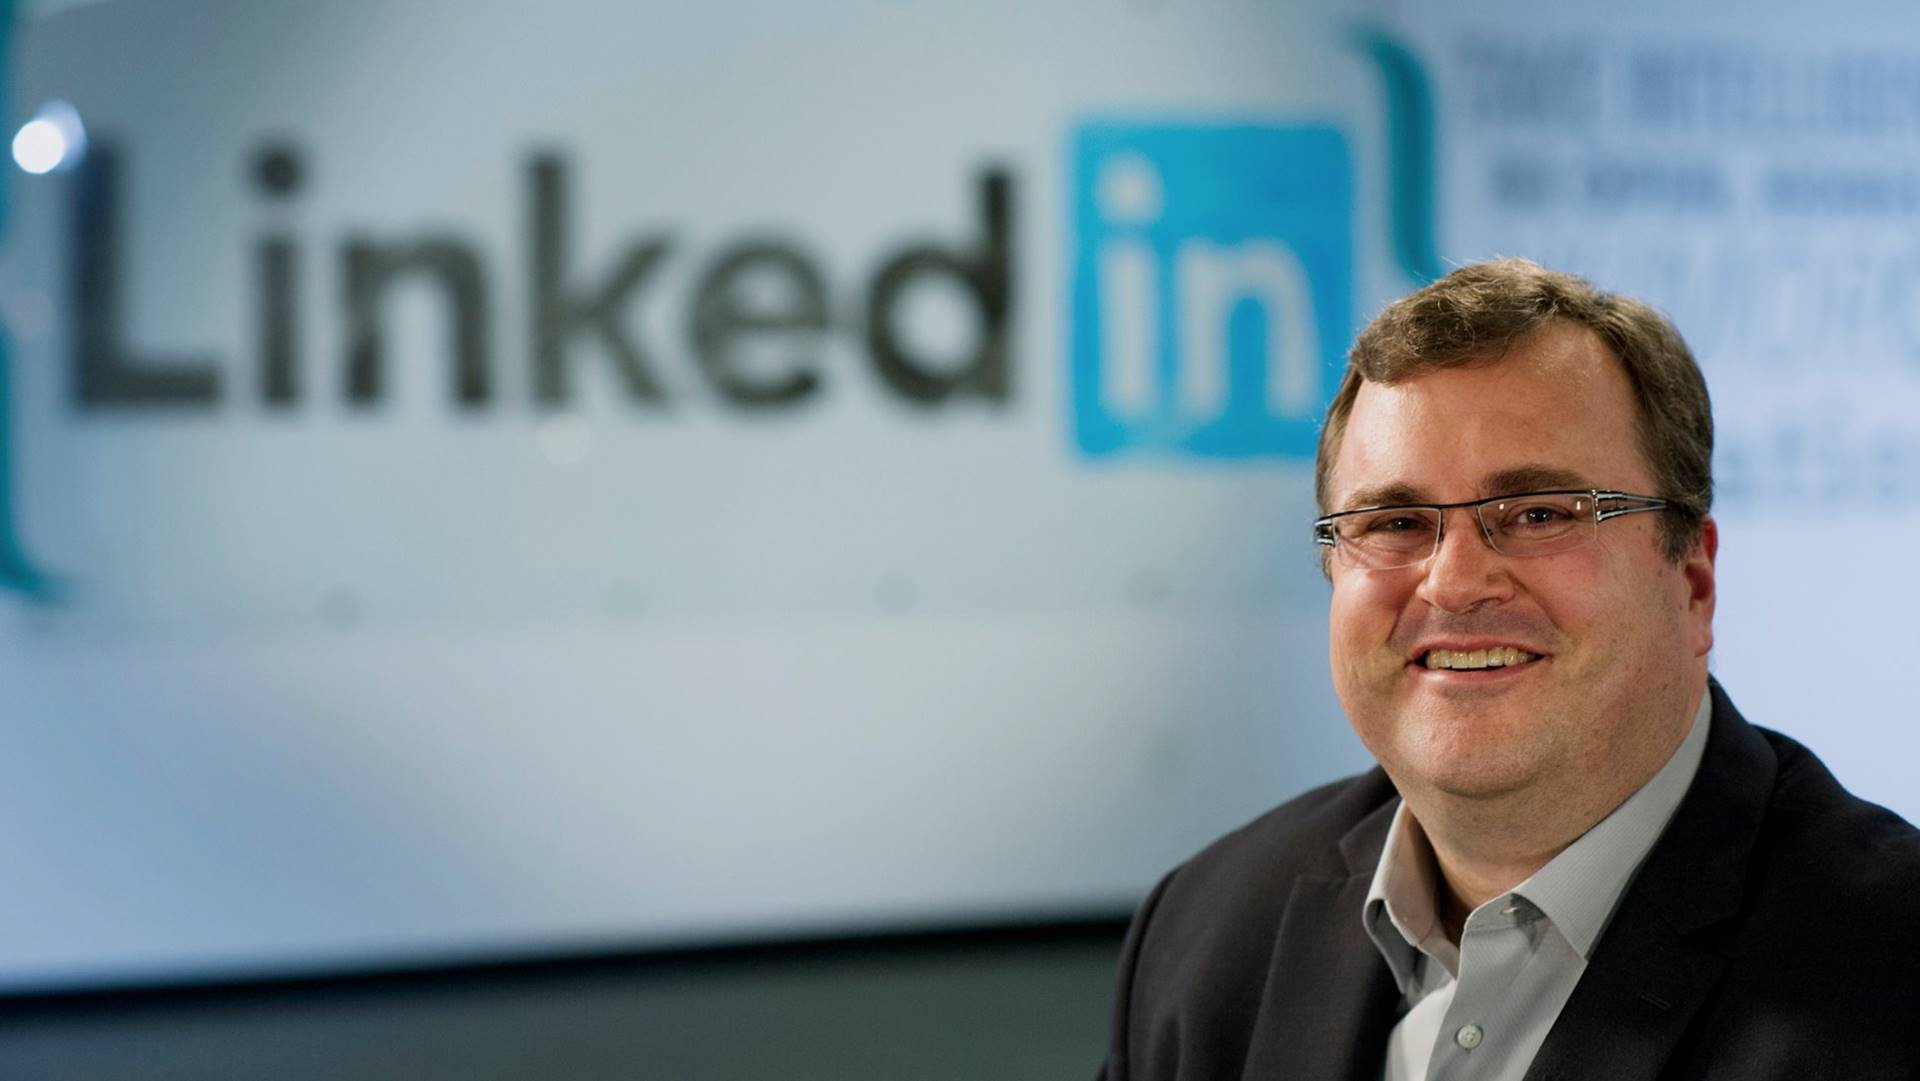 LinkedIn Co-Founder Reid Hoffman on 'Blitzscaling' and Unintended Consequences